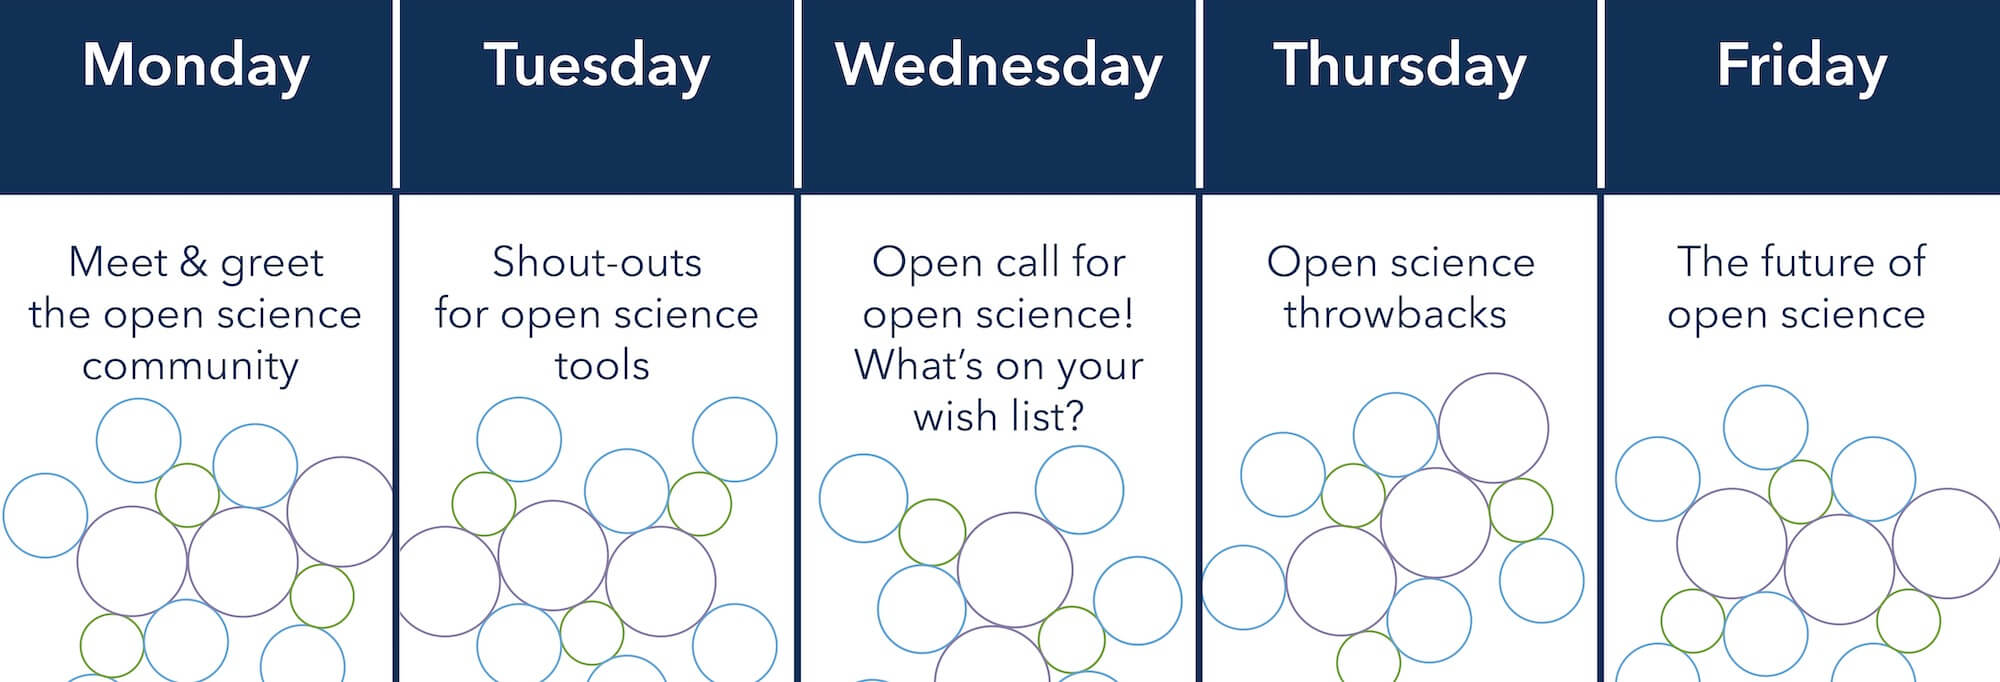 Open Science Week Daily Topics